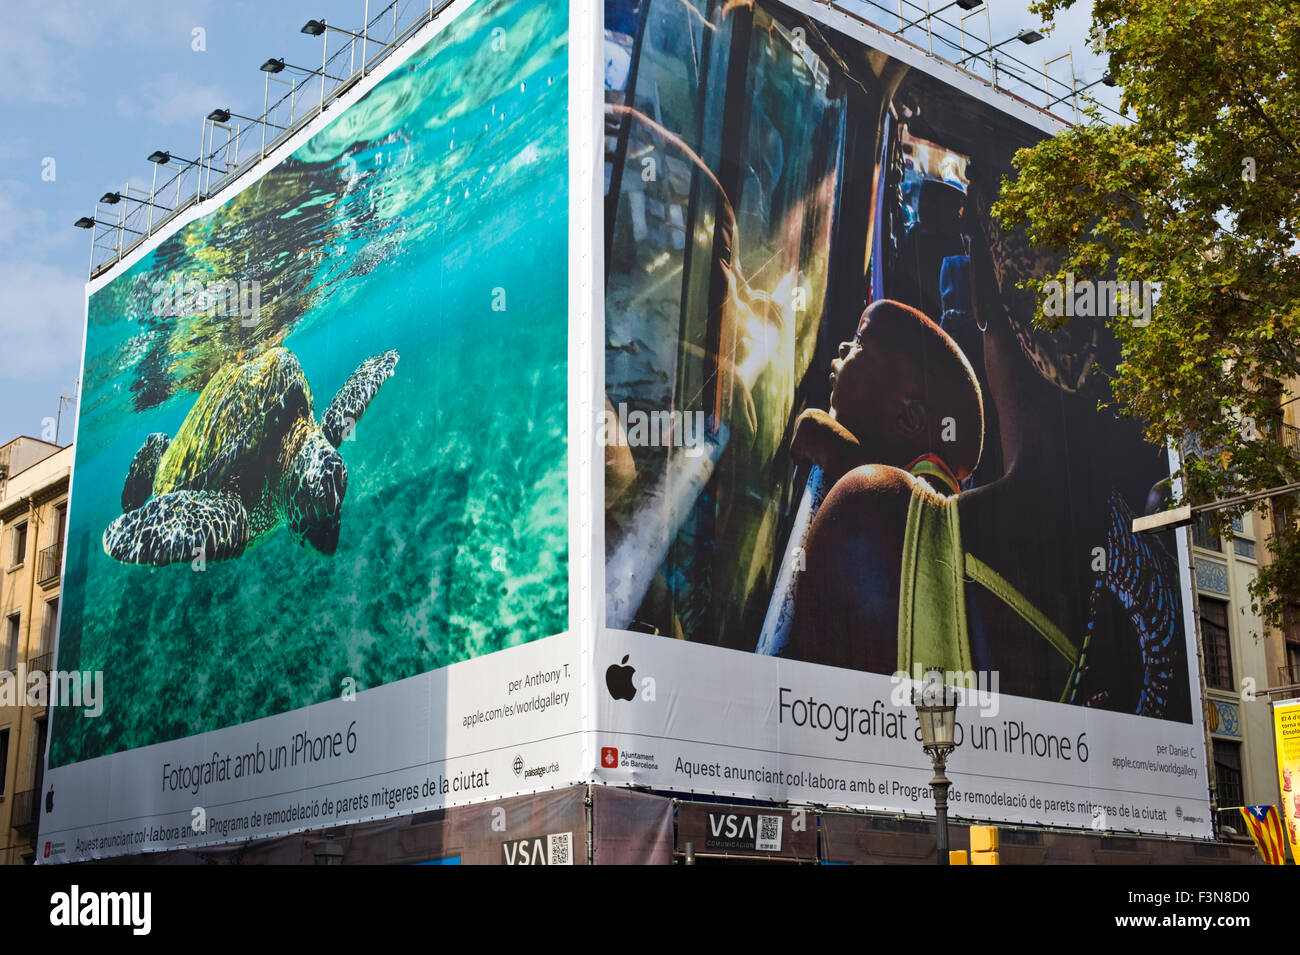 Giant billboard on front of building advertising iPhone 6 in Barcelona Catalonia Spain ES Stock Photo